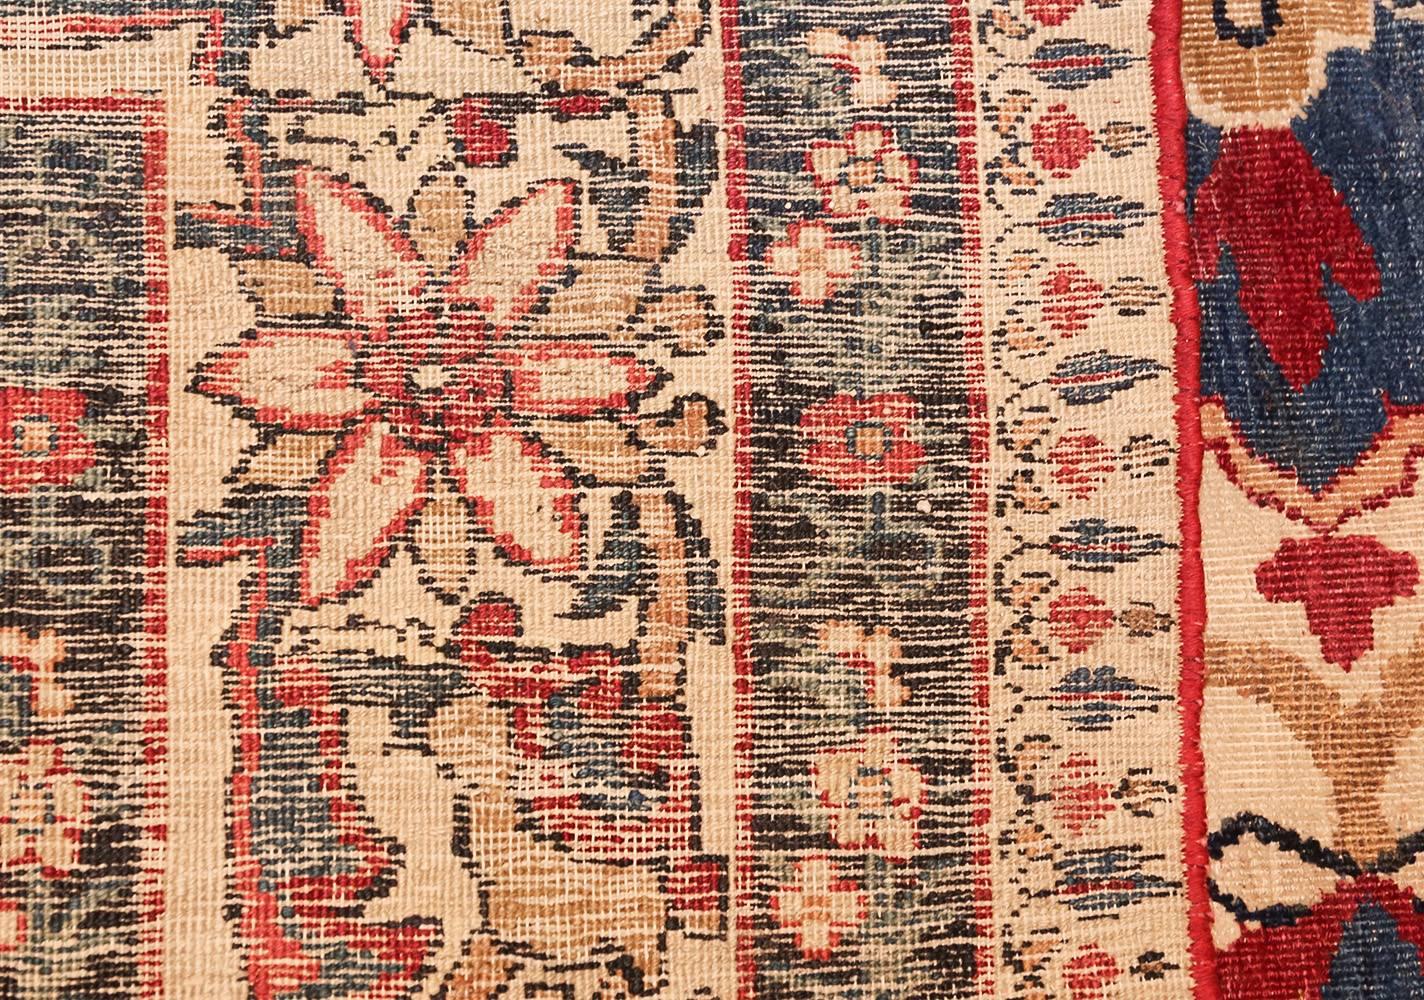 Hand-Knotted Antique Persian Kerman Rug. Size: 9 ft x 11 ft 6 in (2.74 m x 3.51 m)